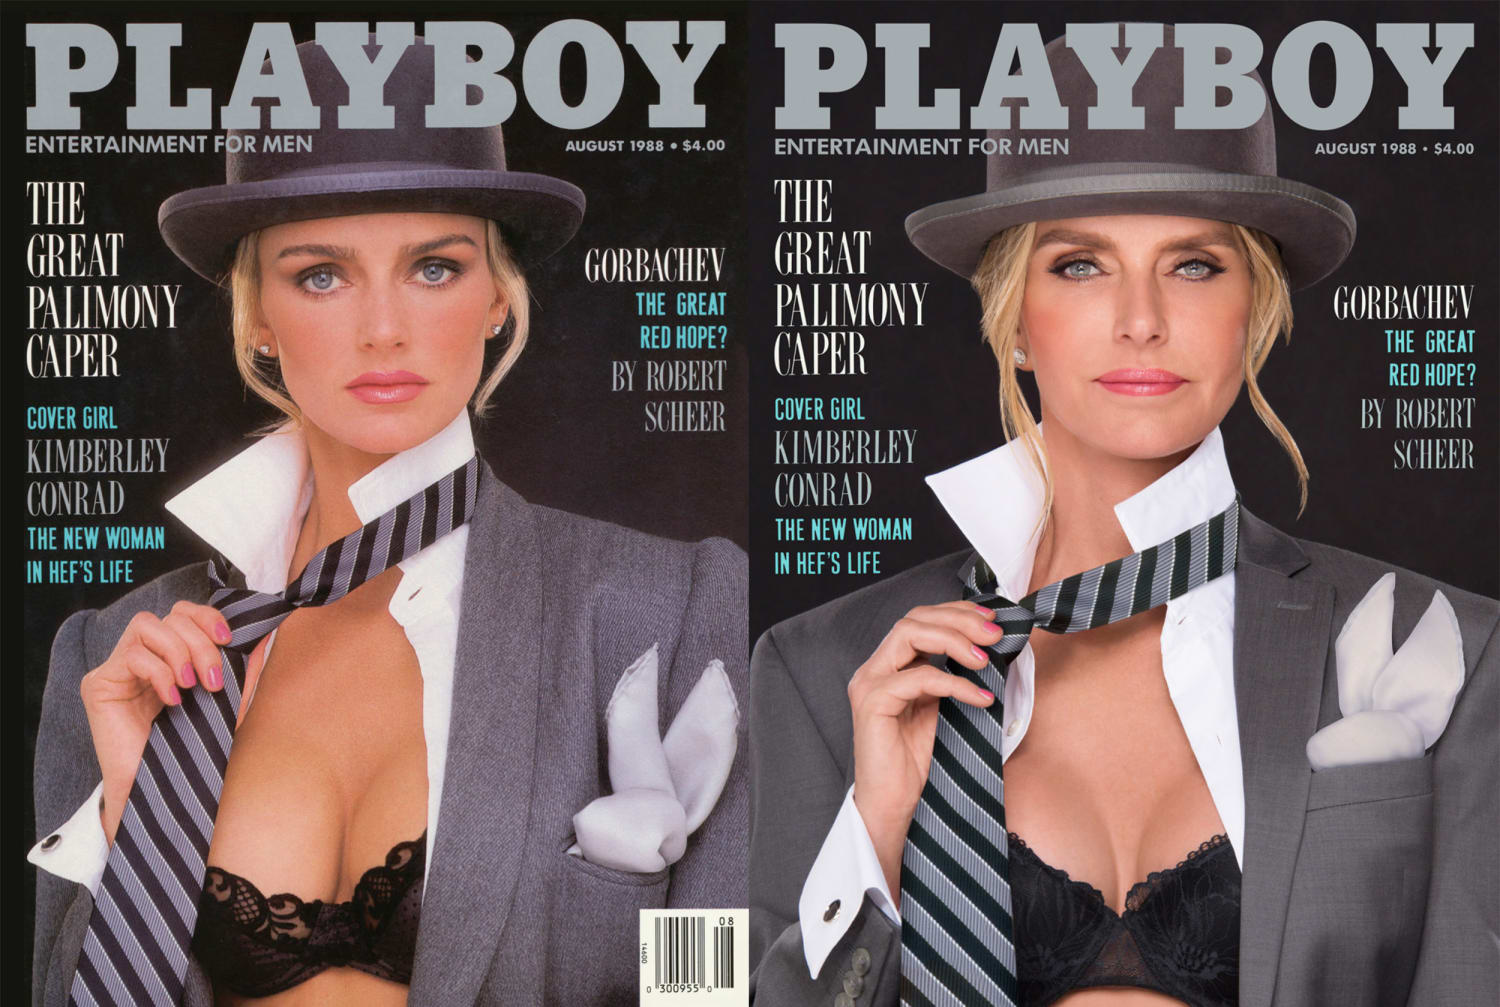 Former Playboy models re-create their covers from the '70s, '80s and '90s